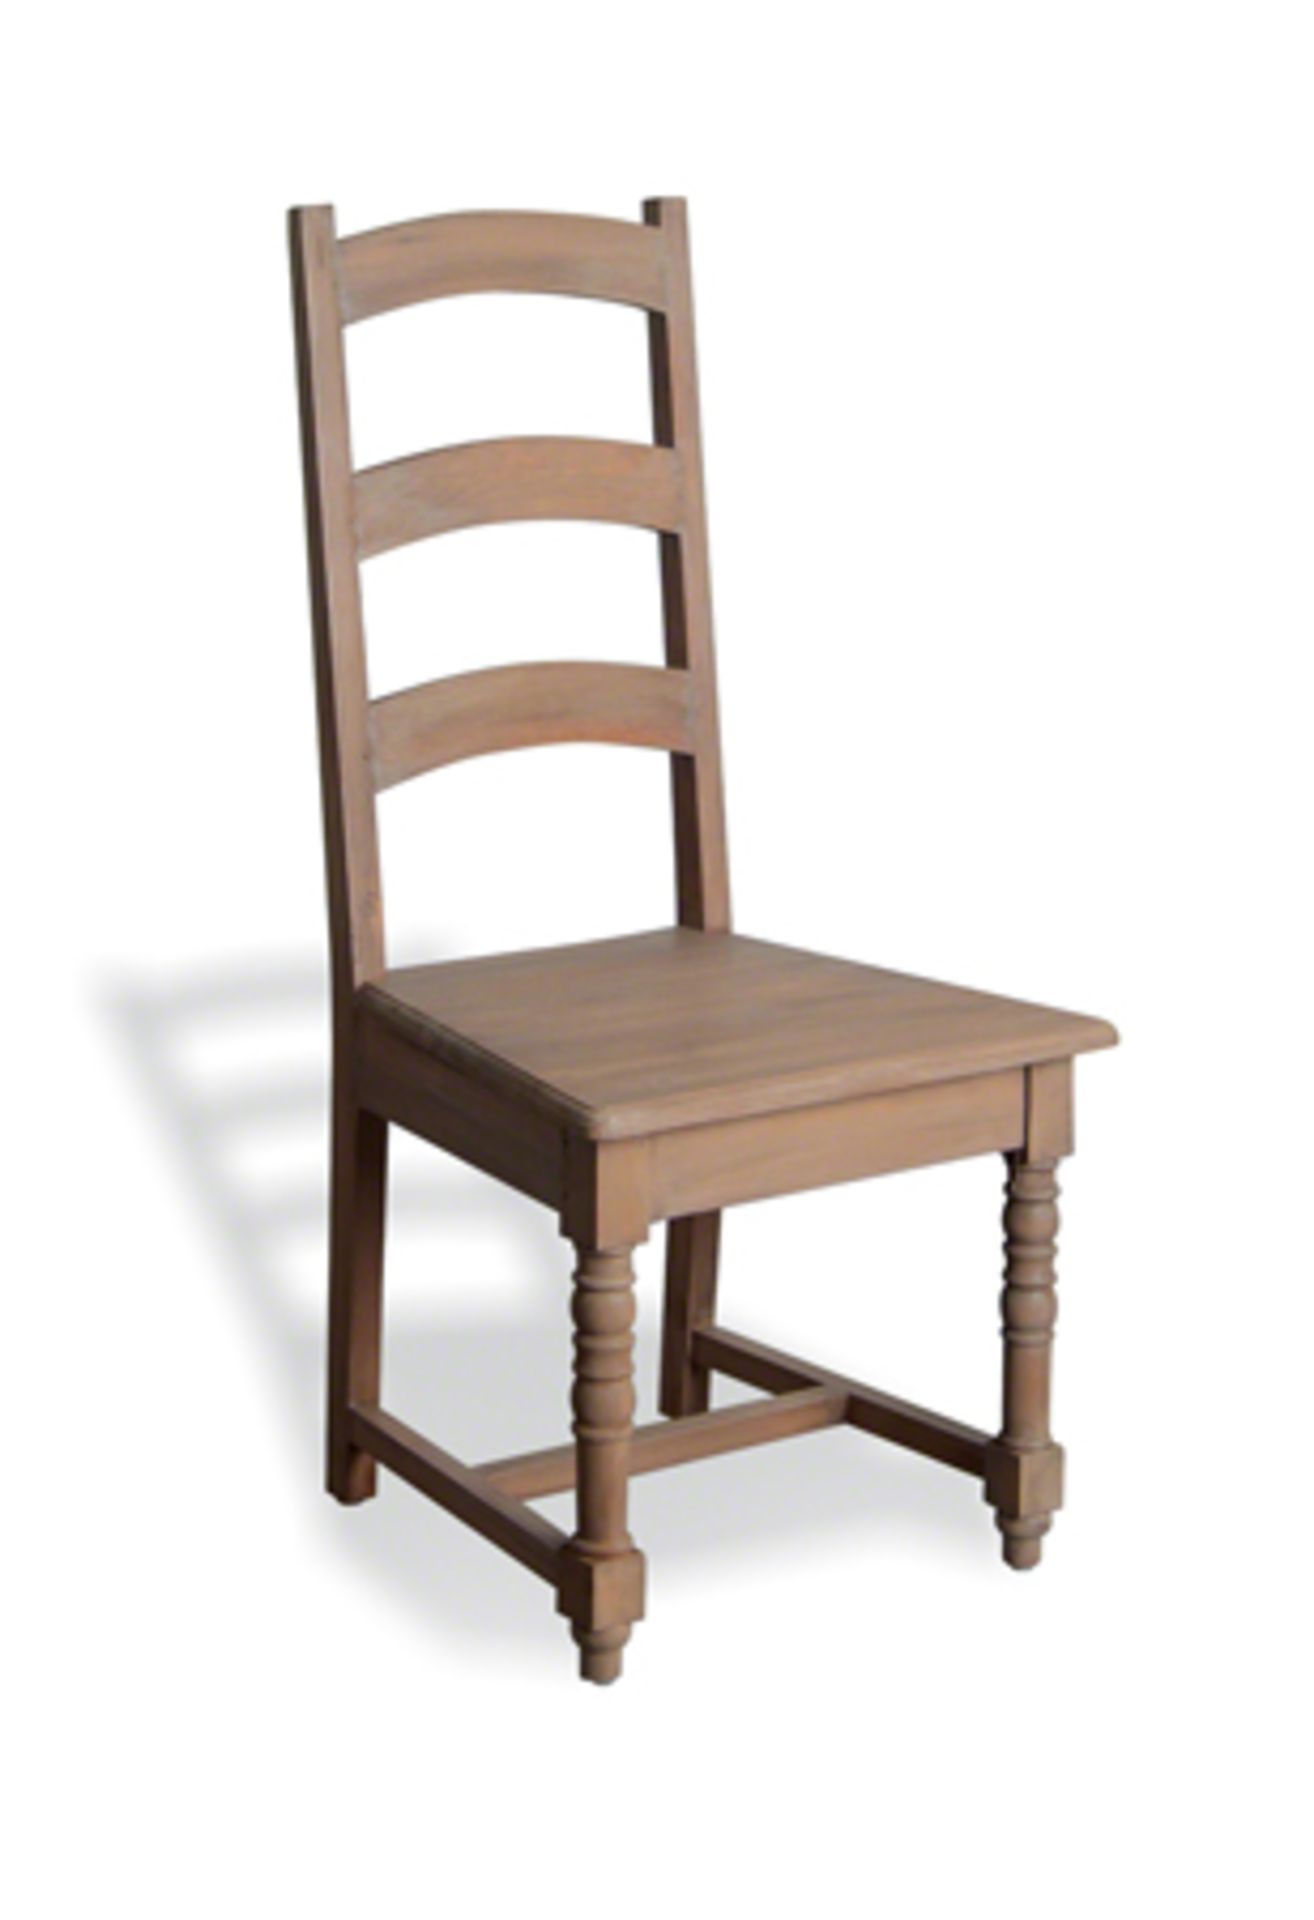 A Pair Of Solid Wood Rustic Pine Farmhouse Dining Chairs - Image 3 of 7